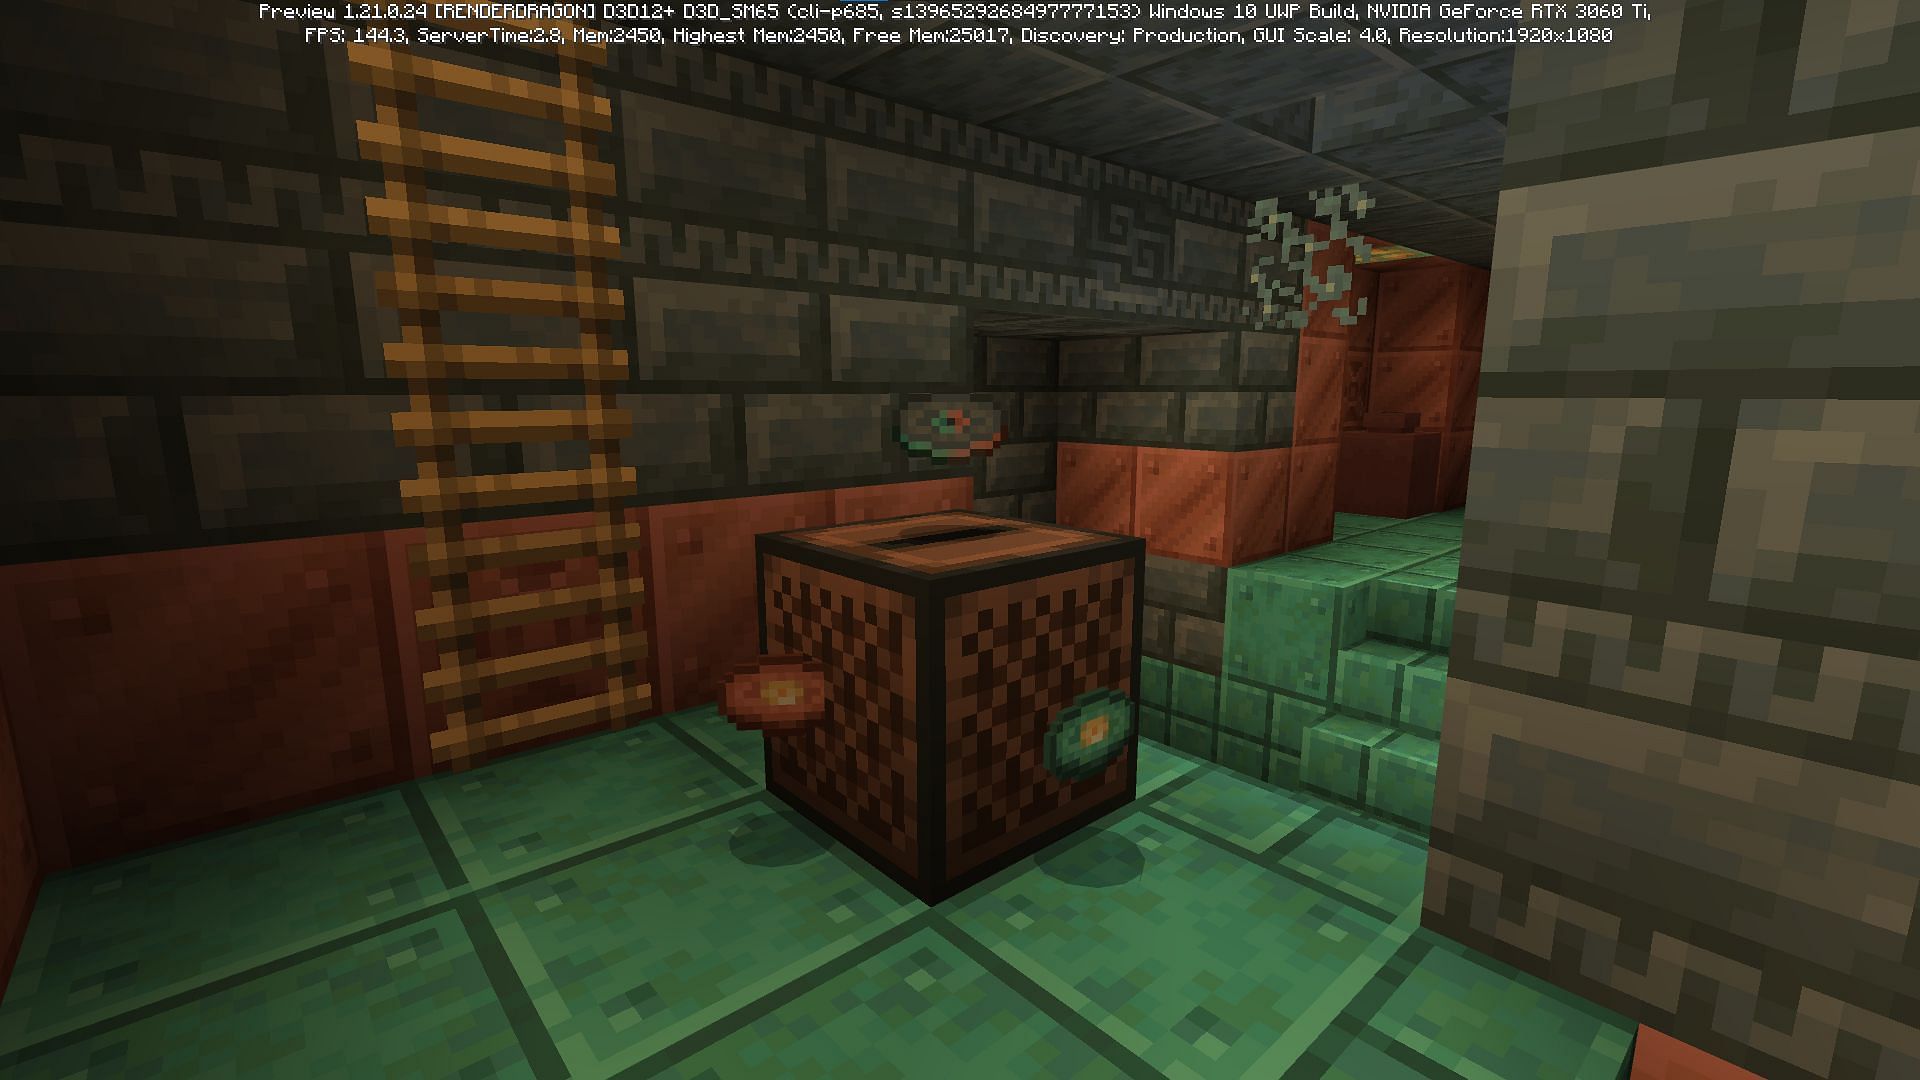 New music discs can be found in the trial chambers (Image via Mojang Studios)